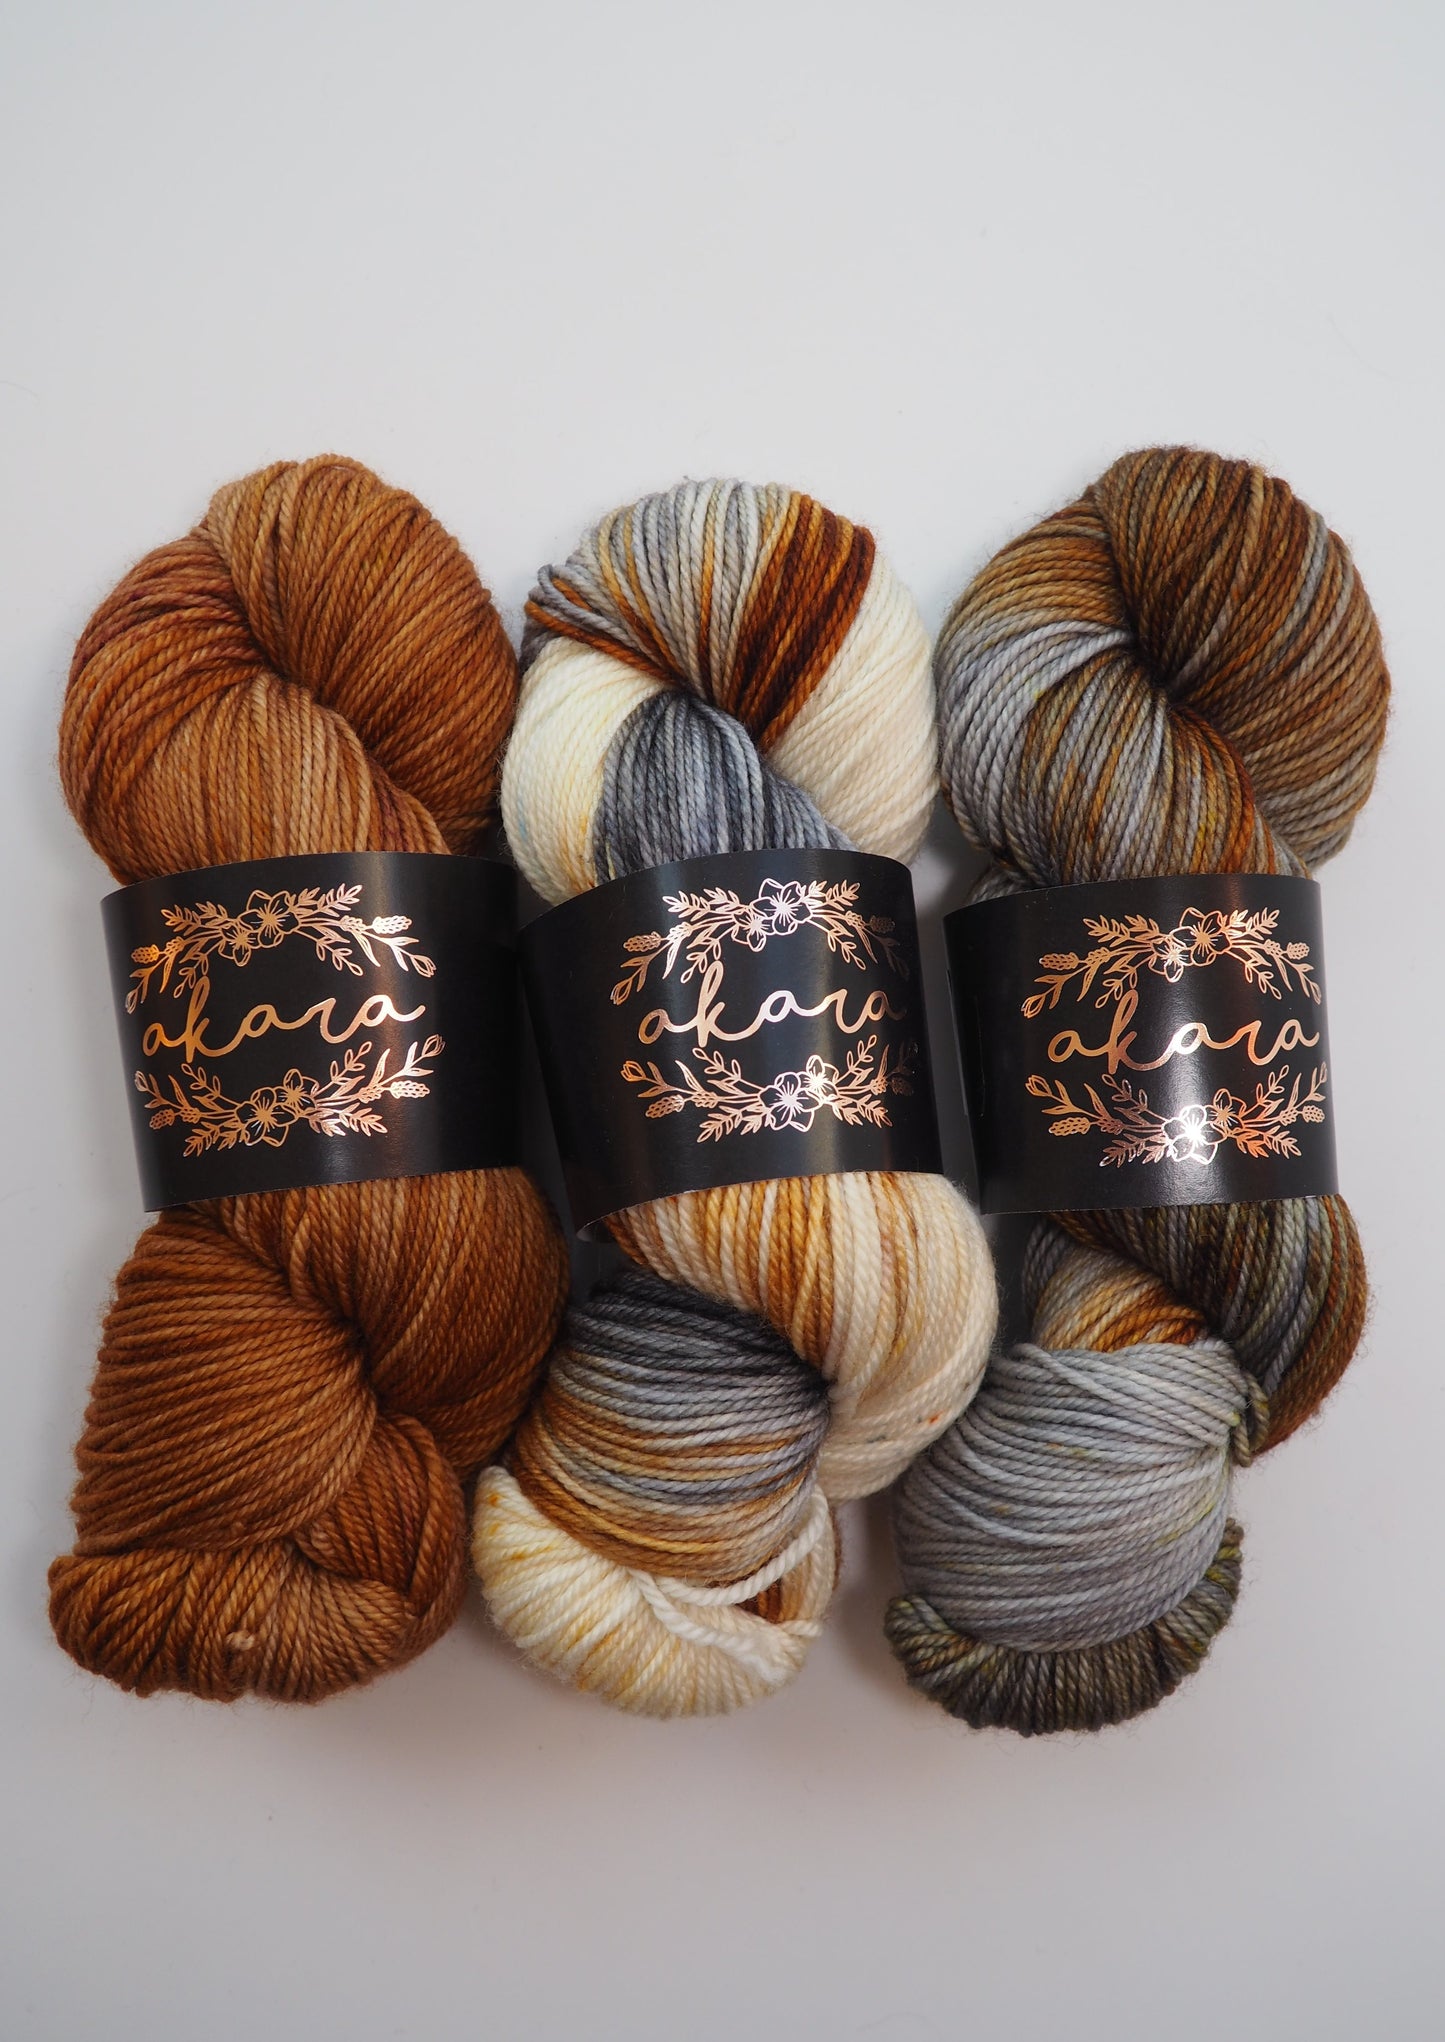 image of three skeins of akara merino dk, one in fallen leaves, one in bear with me (white, grey and brown), and likha (grey and brown)